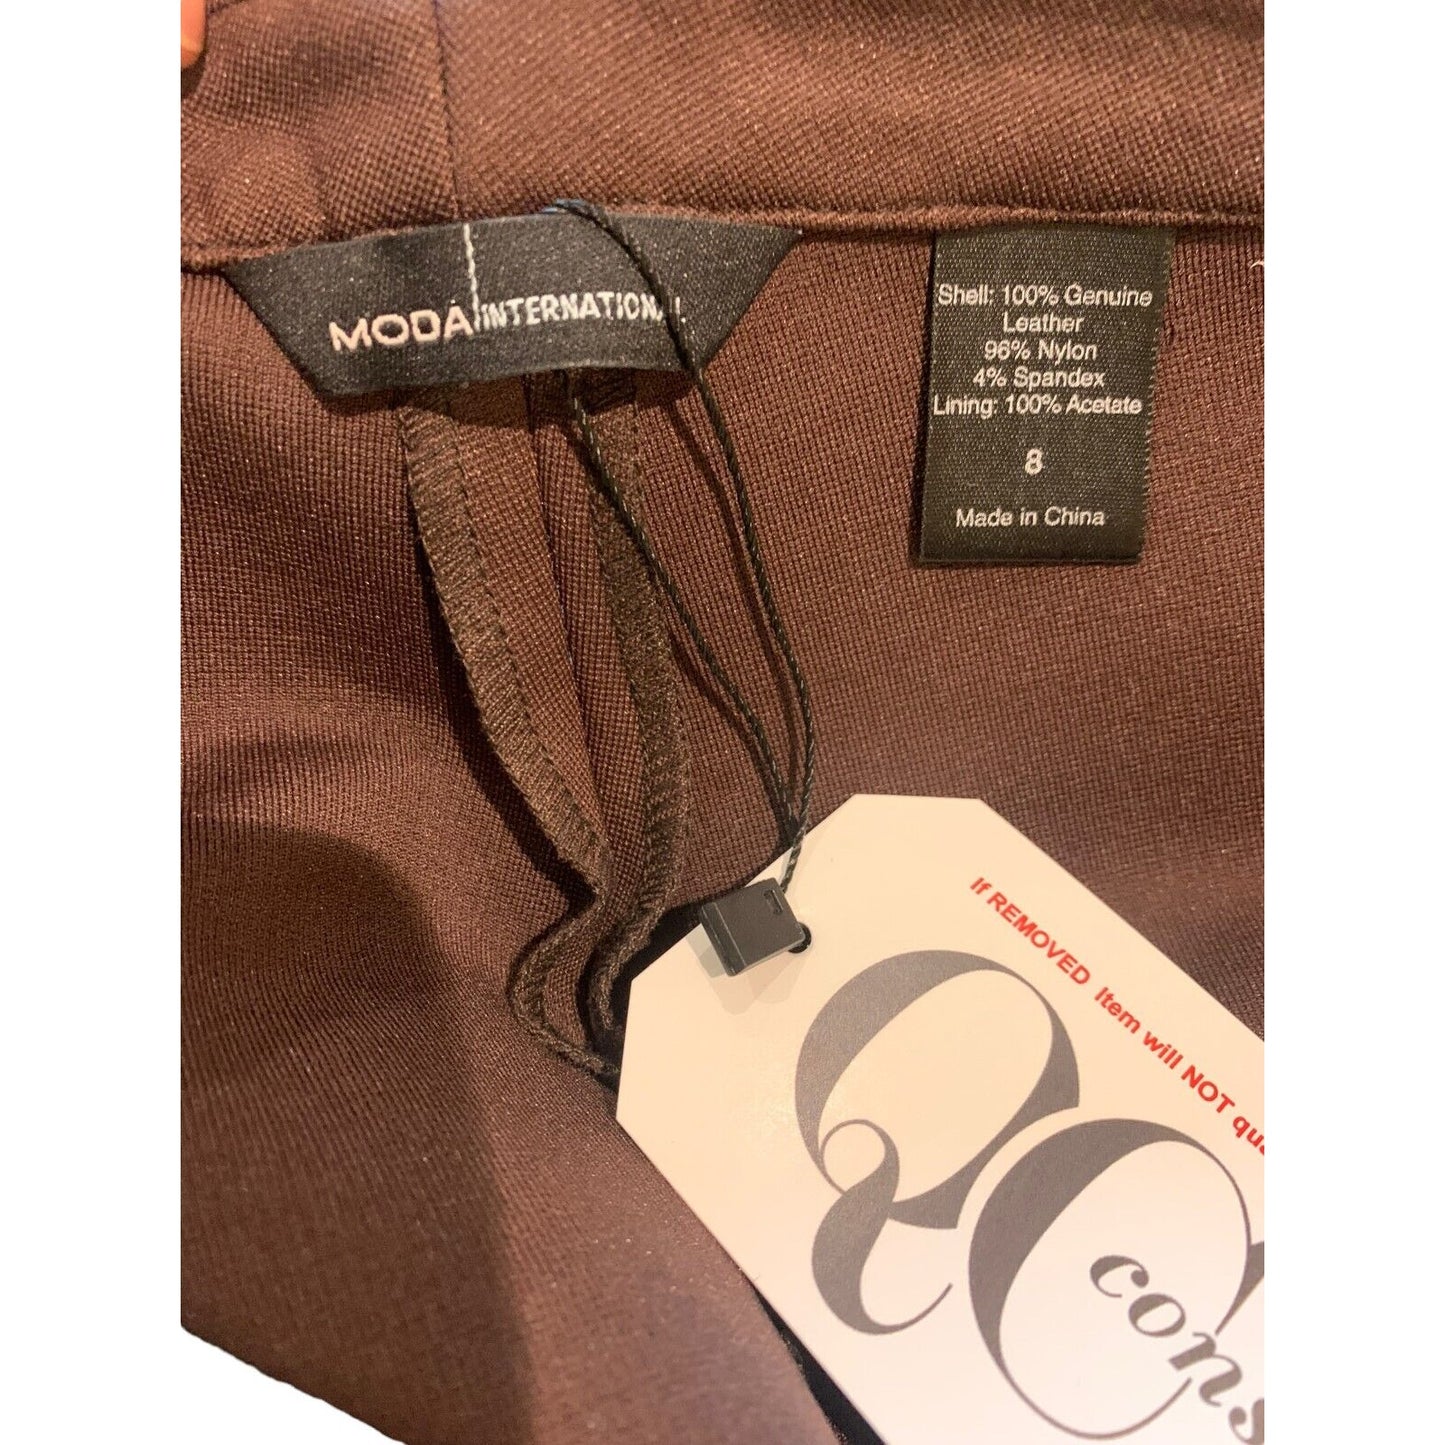 Brand Label, Fabric Info And Merchant Tag